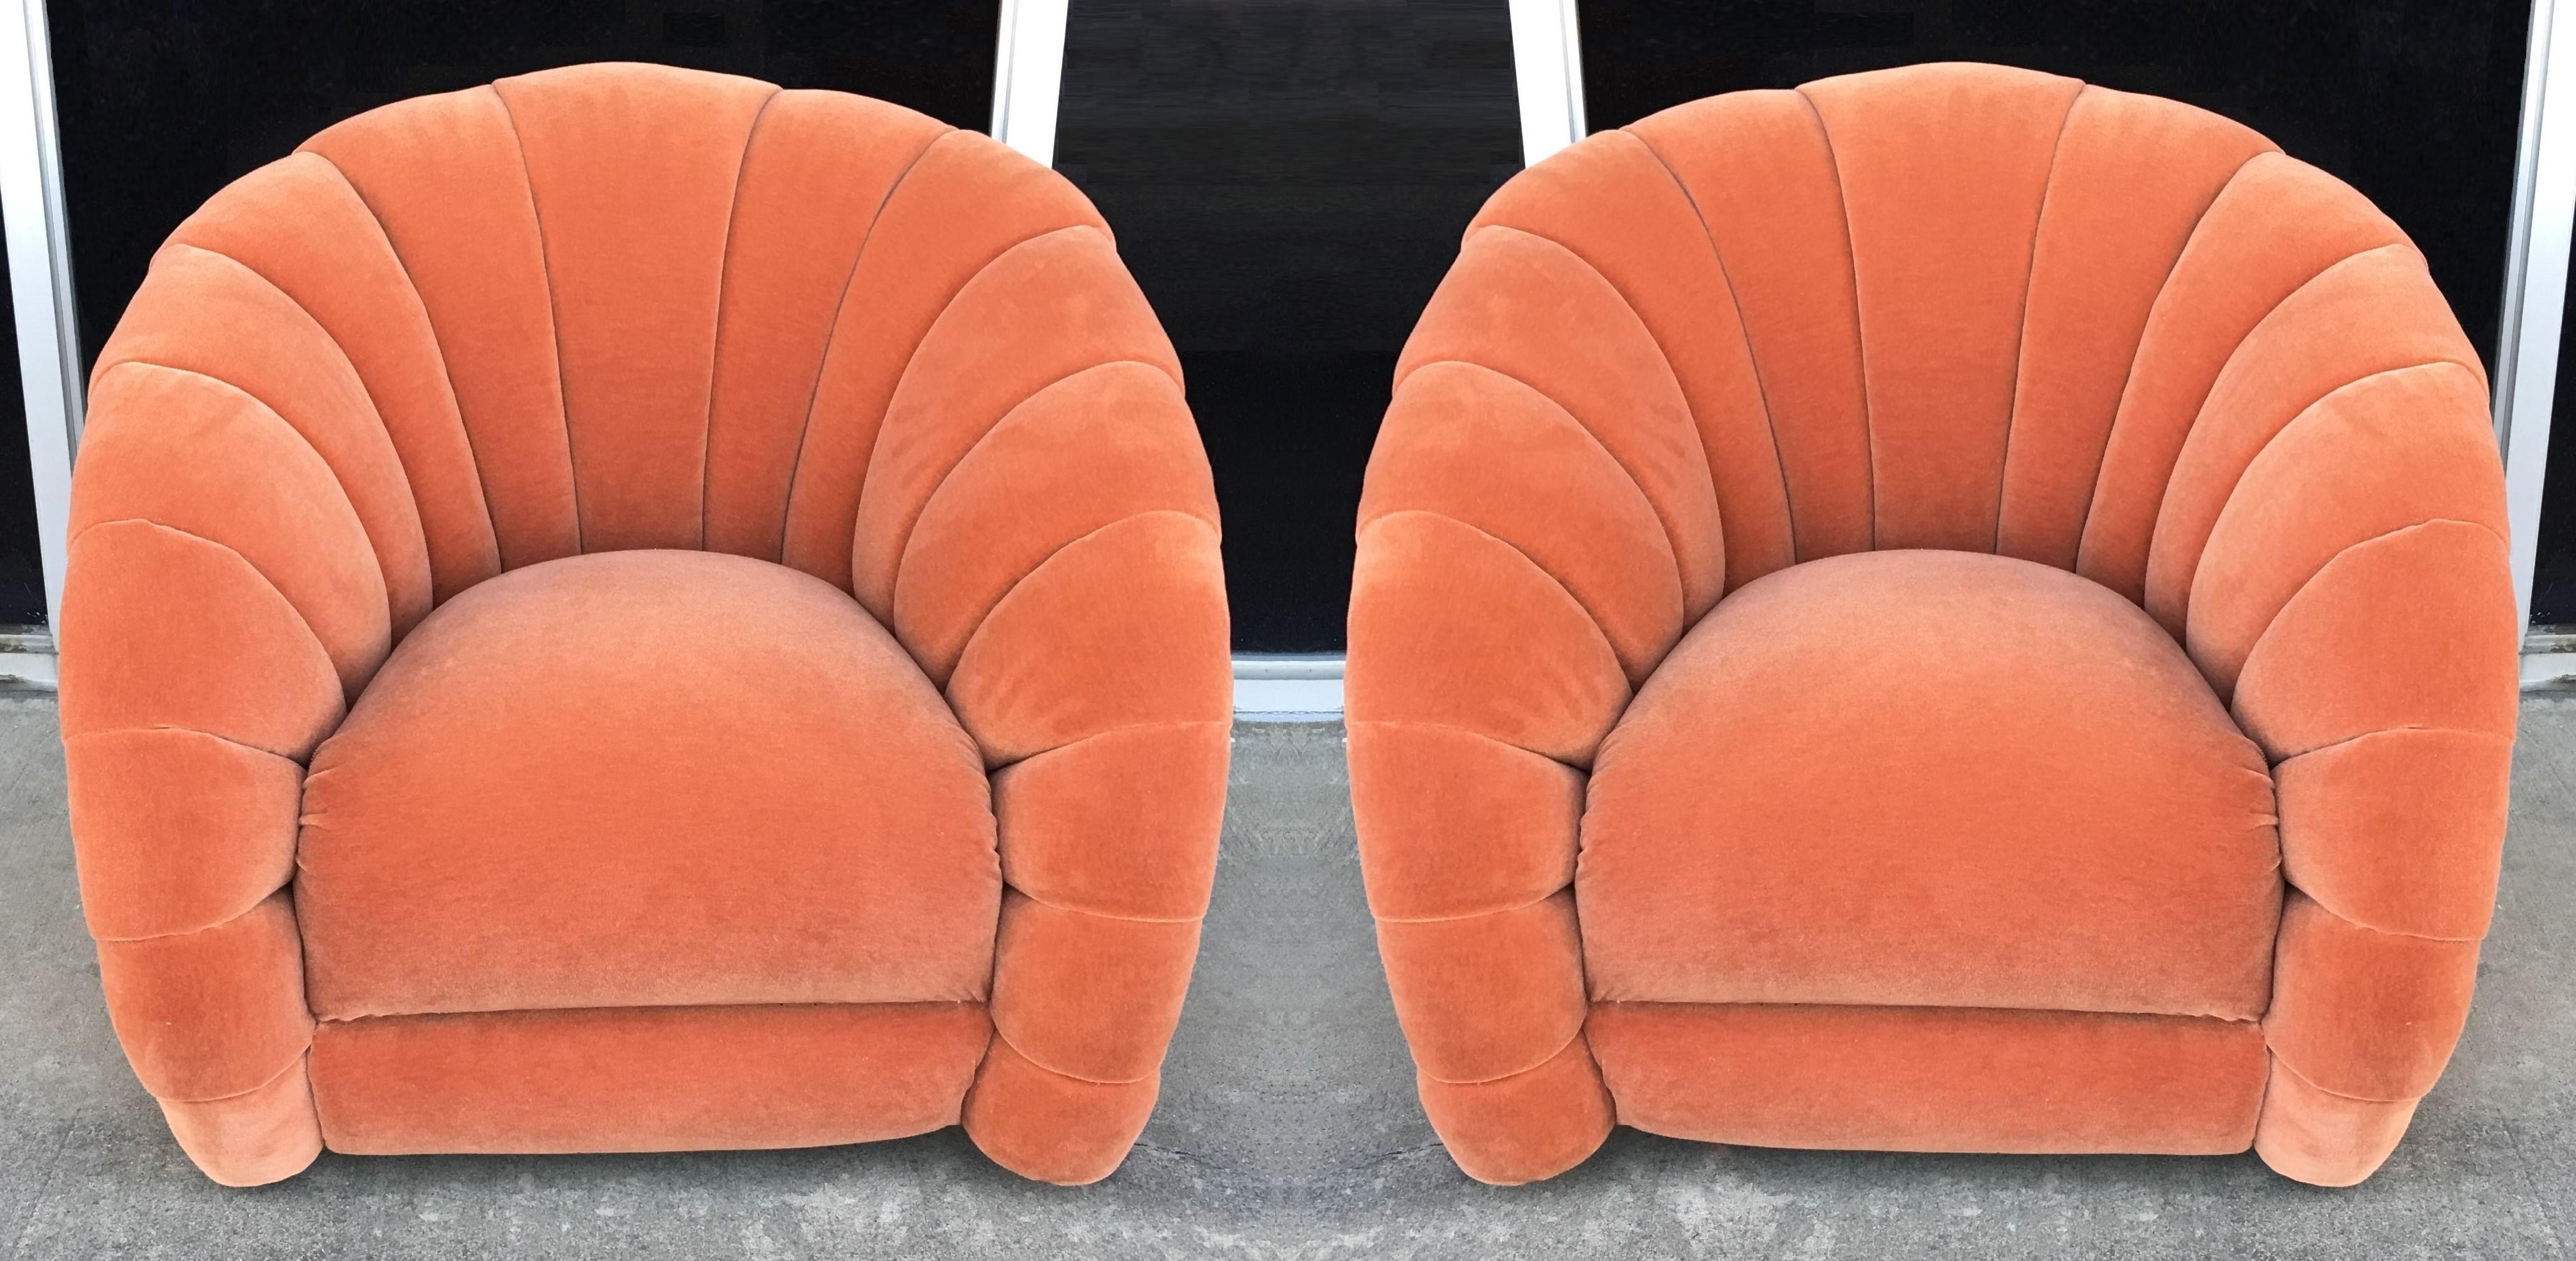 Matching pair of stylish and very comfortable lounge chairs by Vladimir Kagan design for Directional Inc. from the early 1980s. Each professionally custom upholstered swivel chair, barrel back style, covered in an orange velvet fabric. The backs of